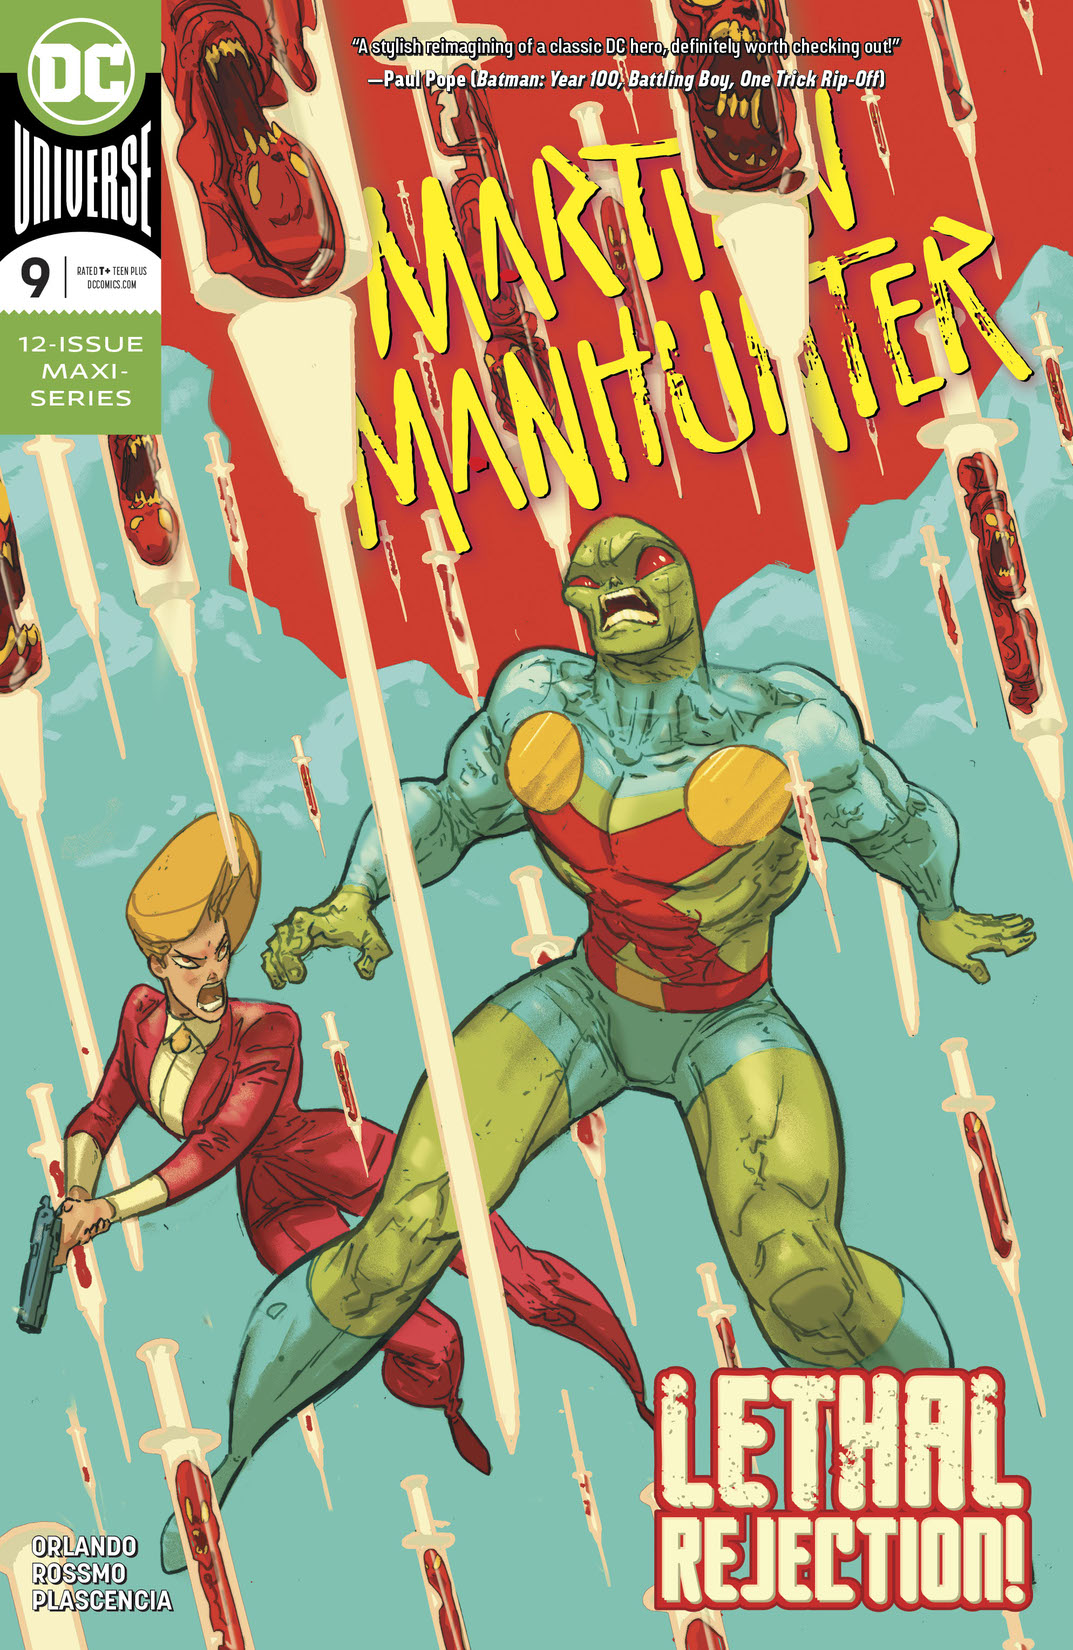 Martian Manhunter (2018-2020) #9 preview images